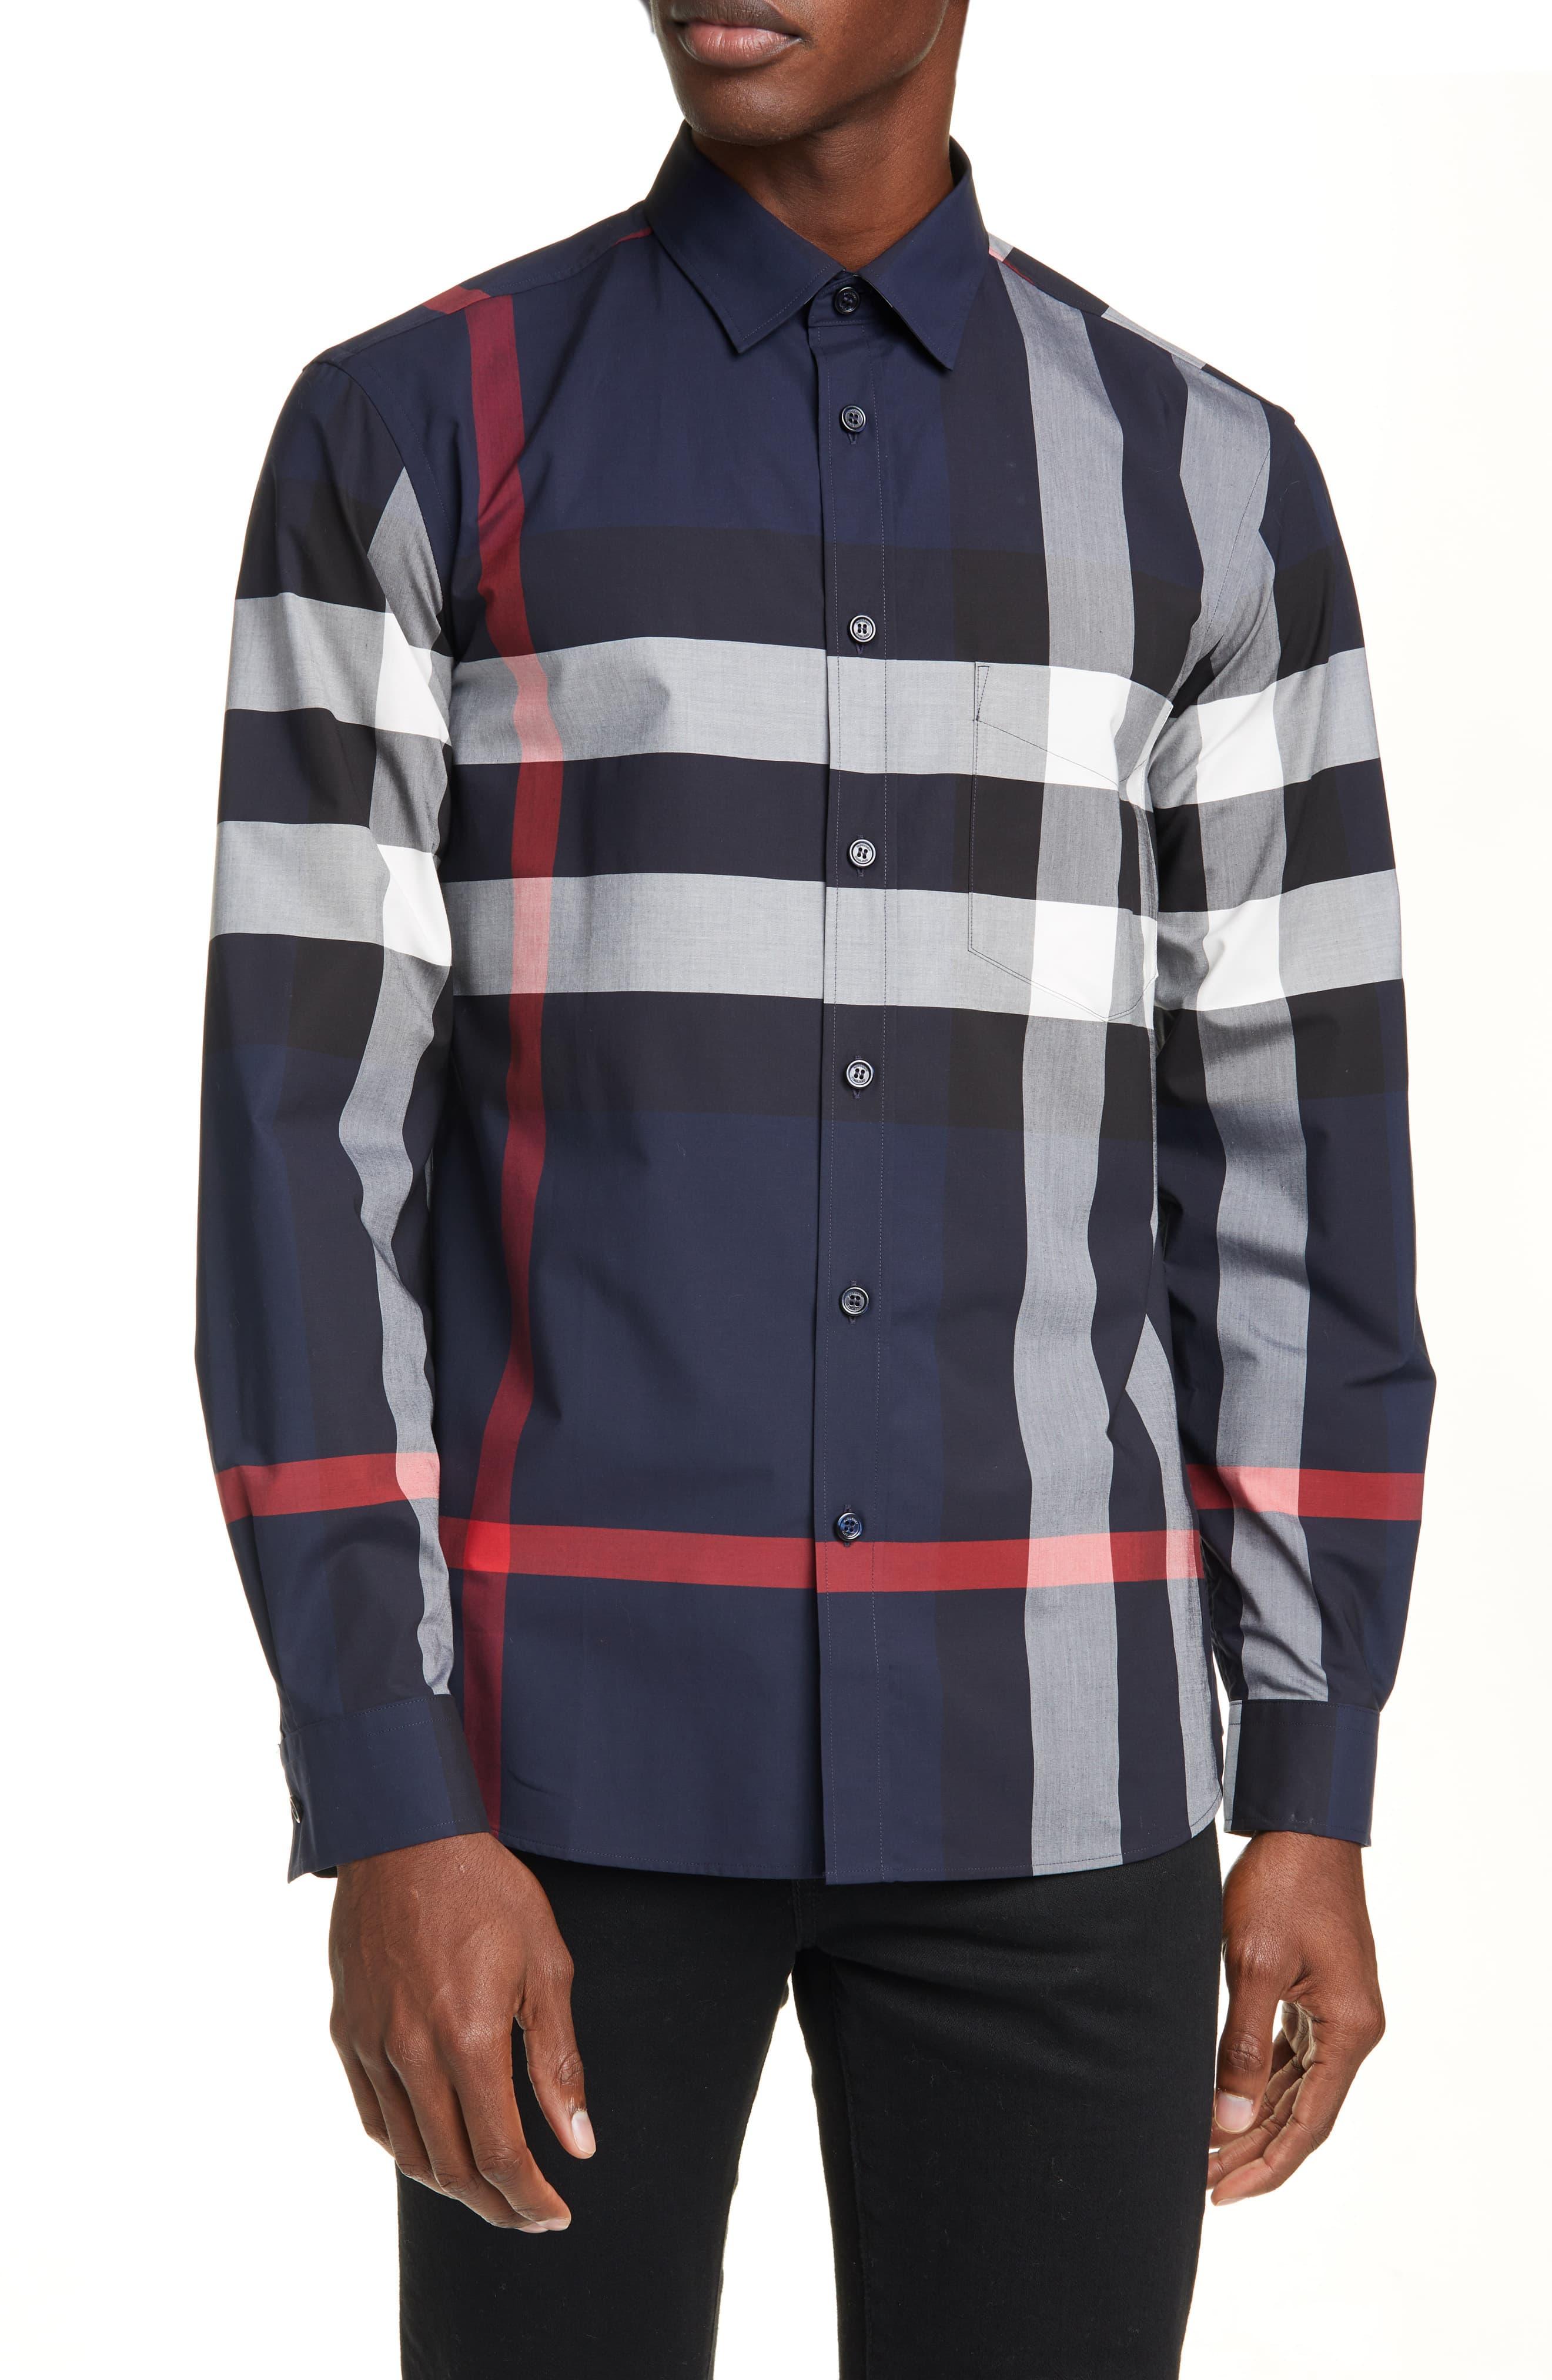 Burberry Somerton Plaid Button-up Shirt in Navy (Blue) for Men - Lyst